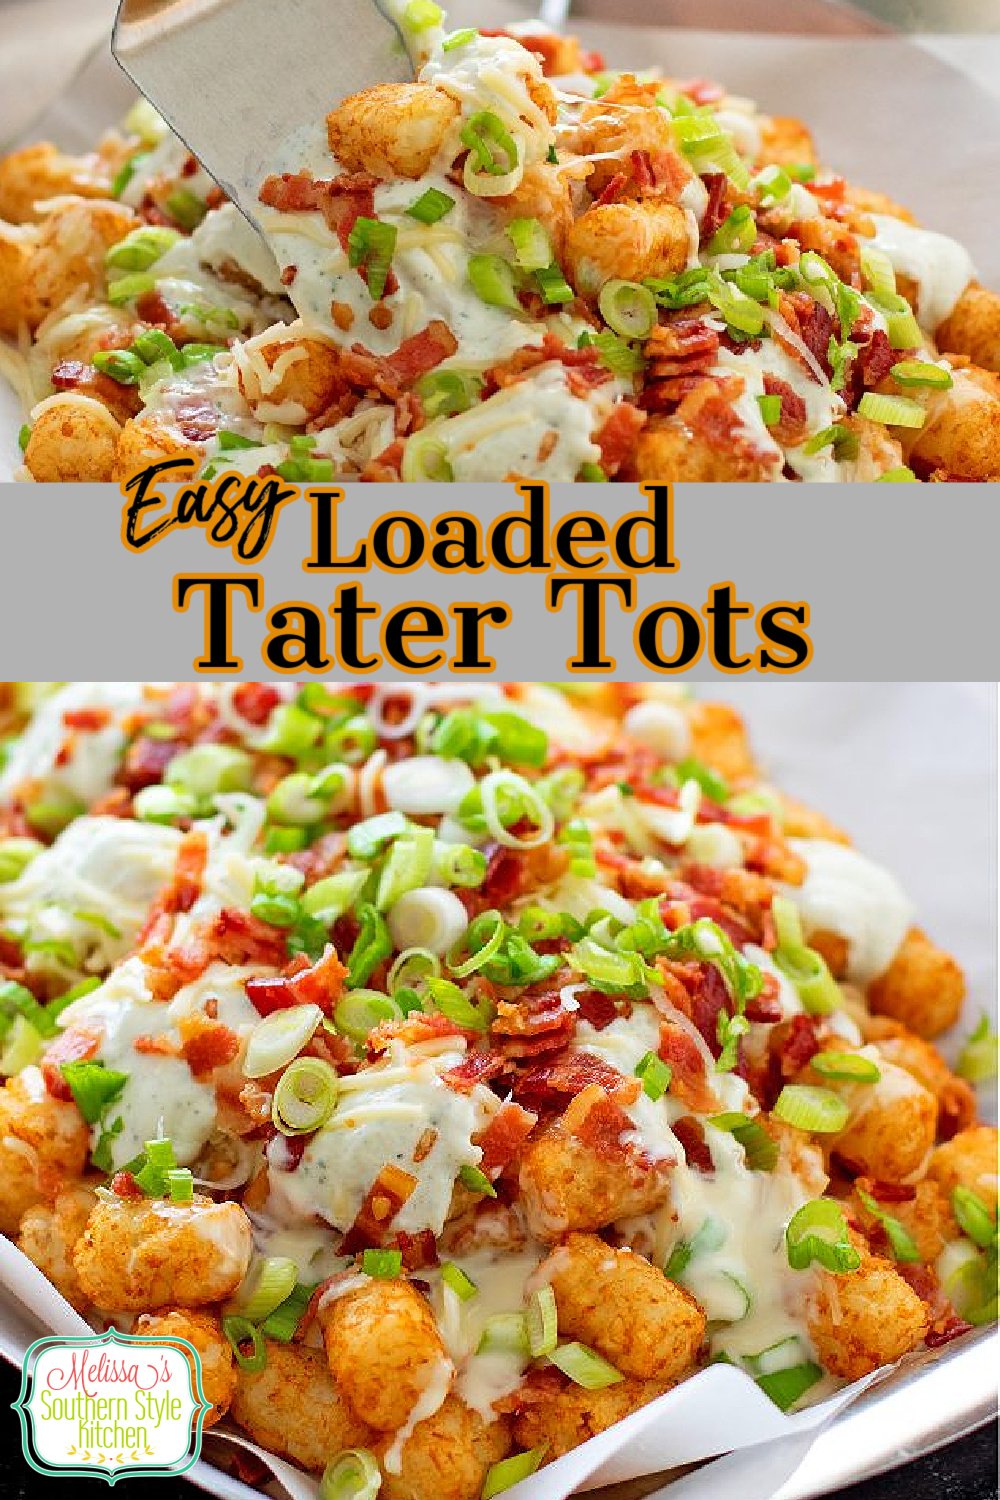 This fun to make Loaded Tater Tots Recipe can be served as an appetizer, side dish or for game day snacking #tatertots #loladedtatertots #queso #cheesytatertots #taterttotsrecipe #potatoes #potatorecipe #easyrecipes #sidedishrecipes #appetizers #southernrecipes